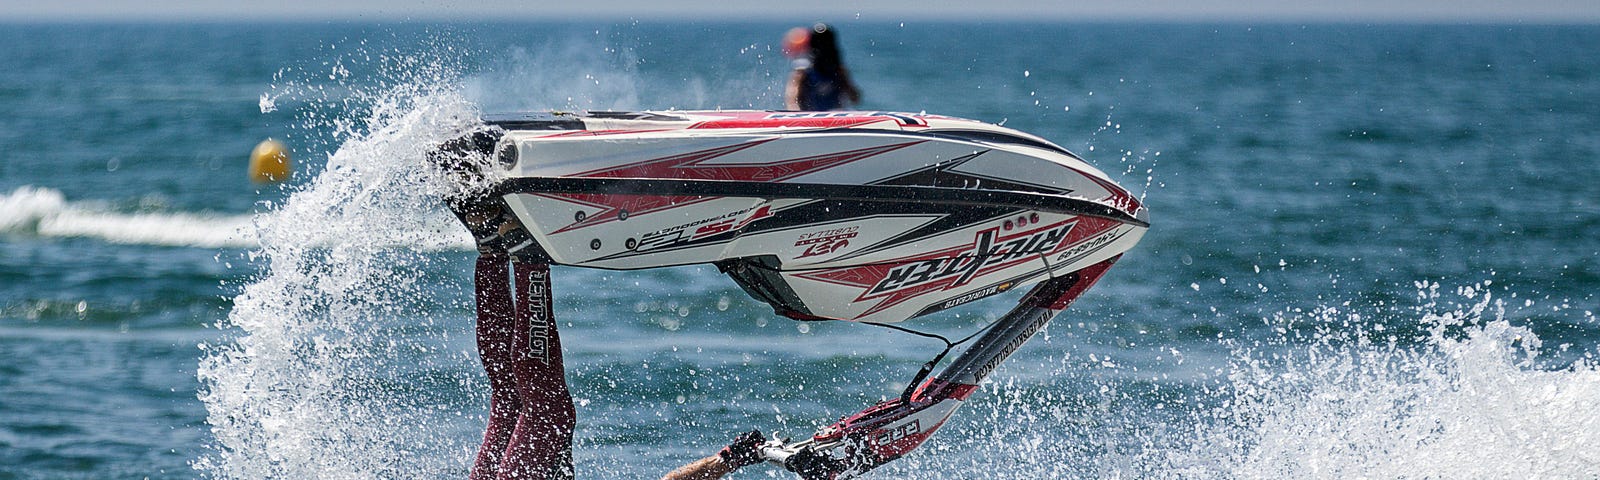 Catastrophic failure of an upside-down jet ski